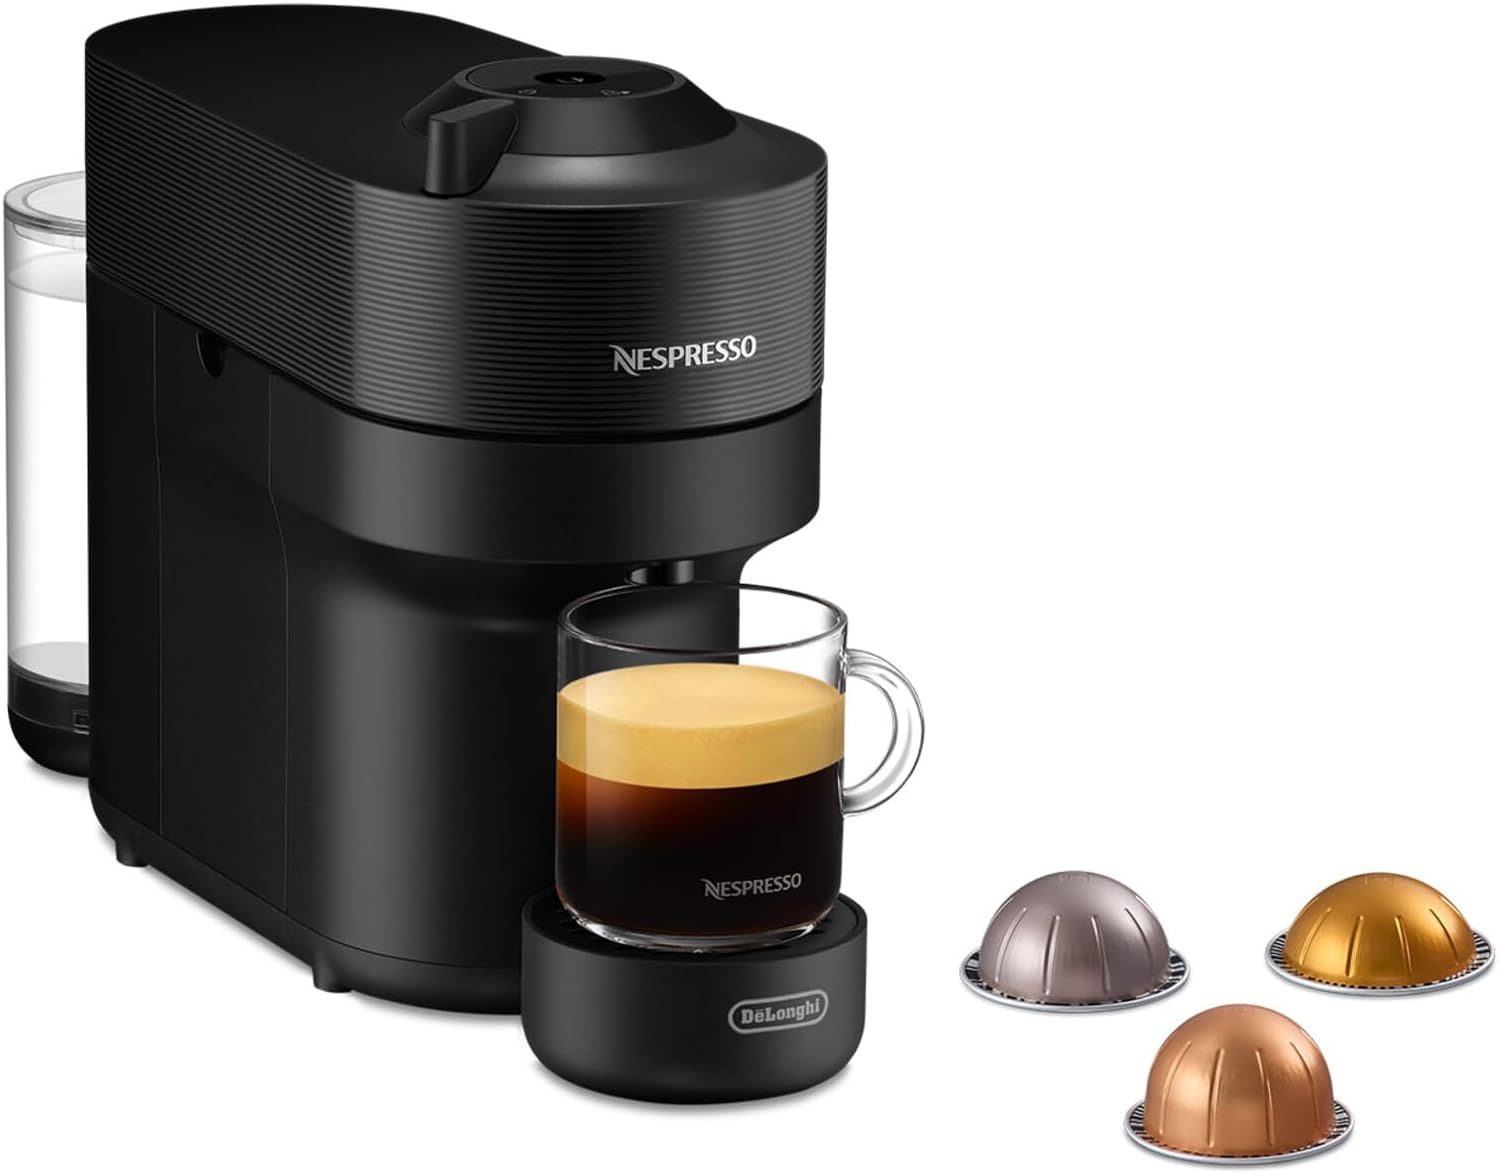 Nespresso de \ 'Longhi Env90.b Vertuo Pop Coffee Capsule Machine, Prepares 4 Cup Sises, Centrifusion Technology, Welcome Package Included, 1350W, Liquorice Black